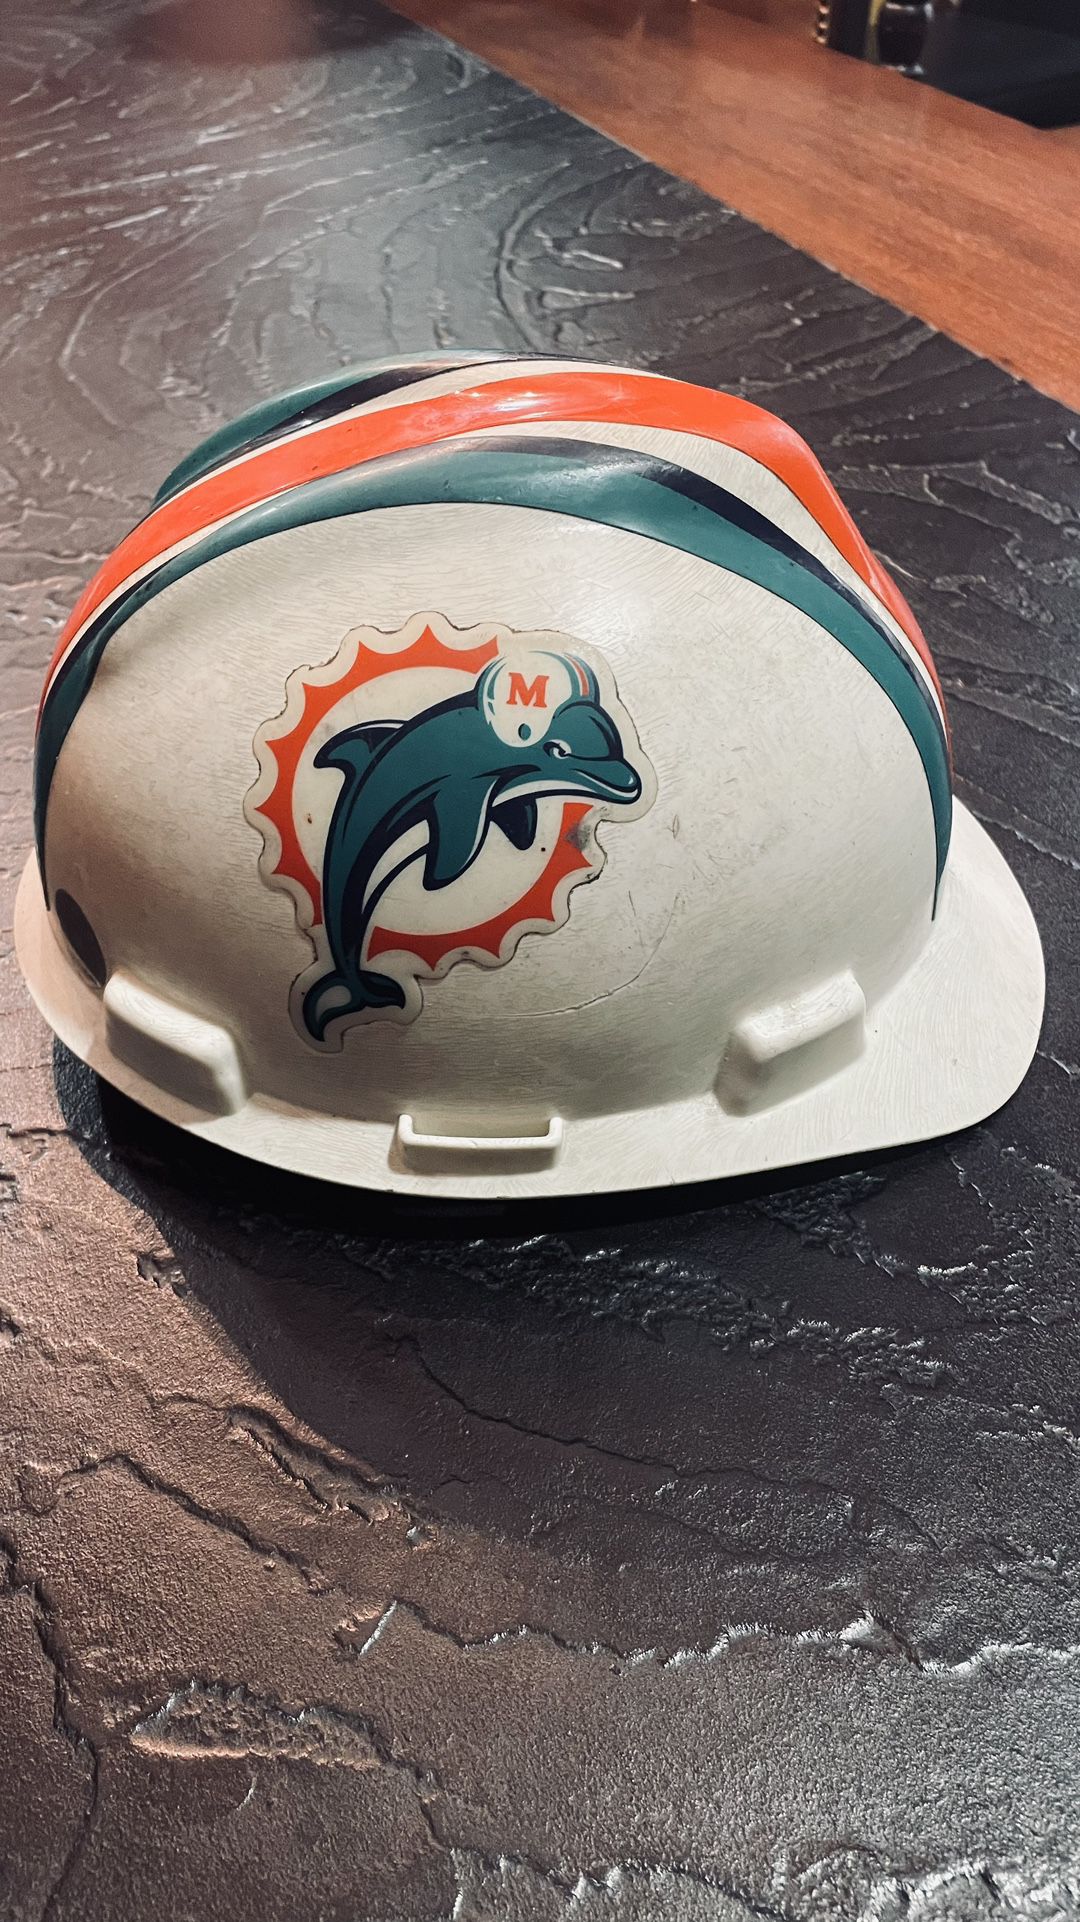 Dolphins construction helmet $20.00 CASH, TEXT FOR PRICES.  